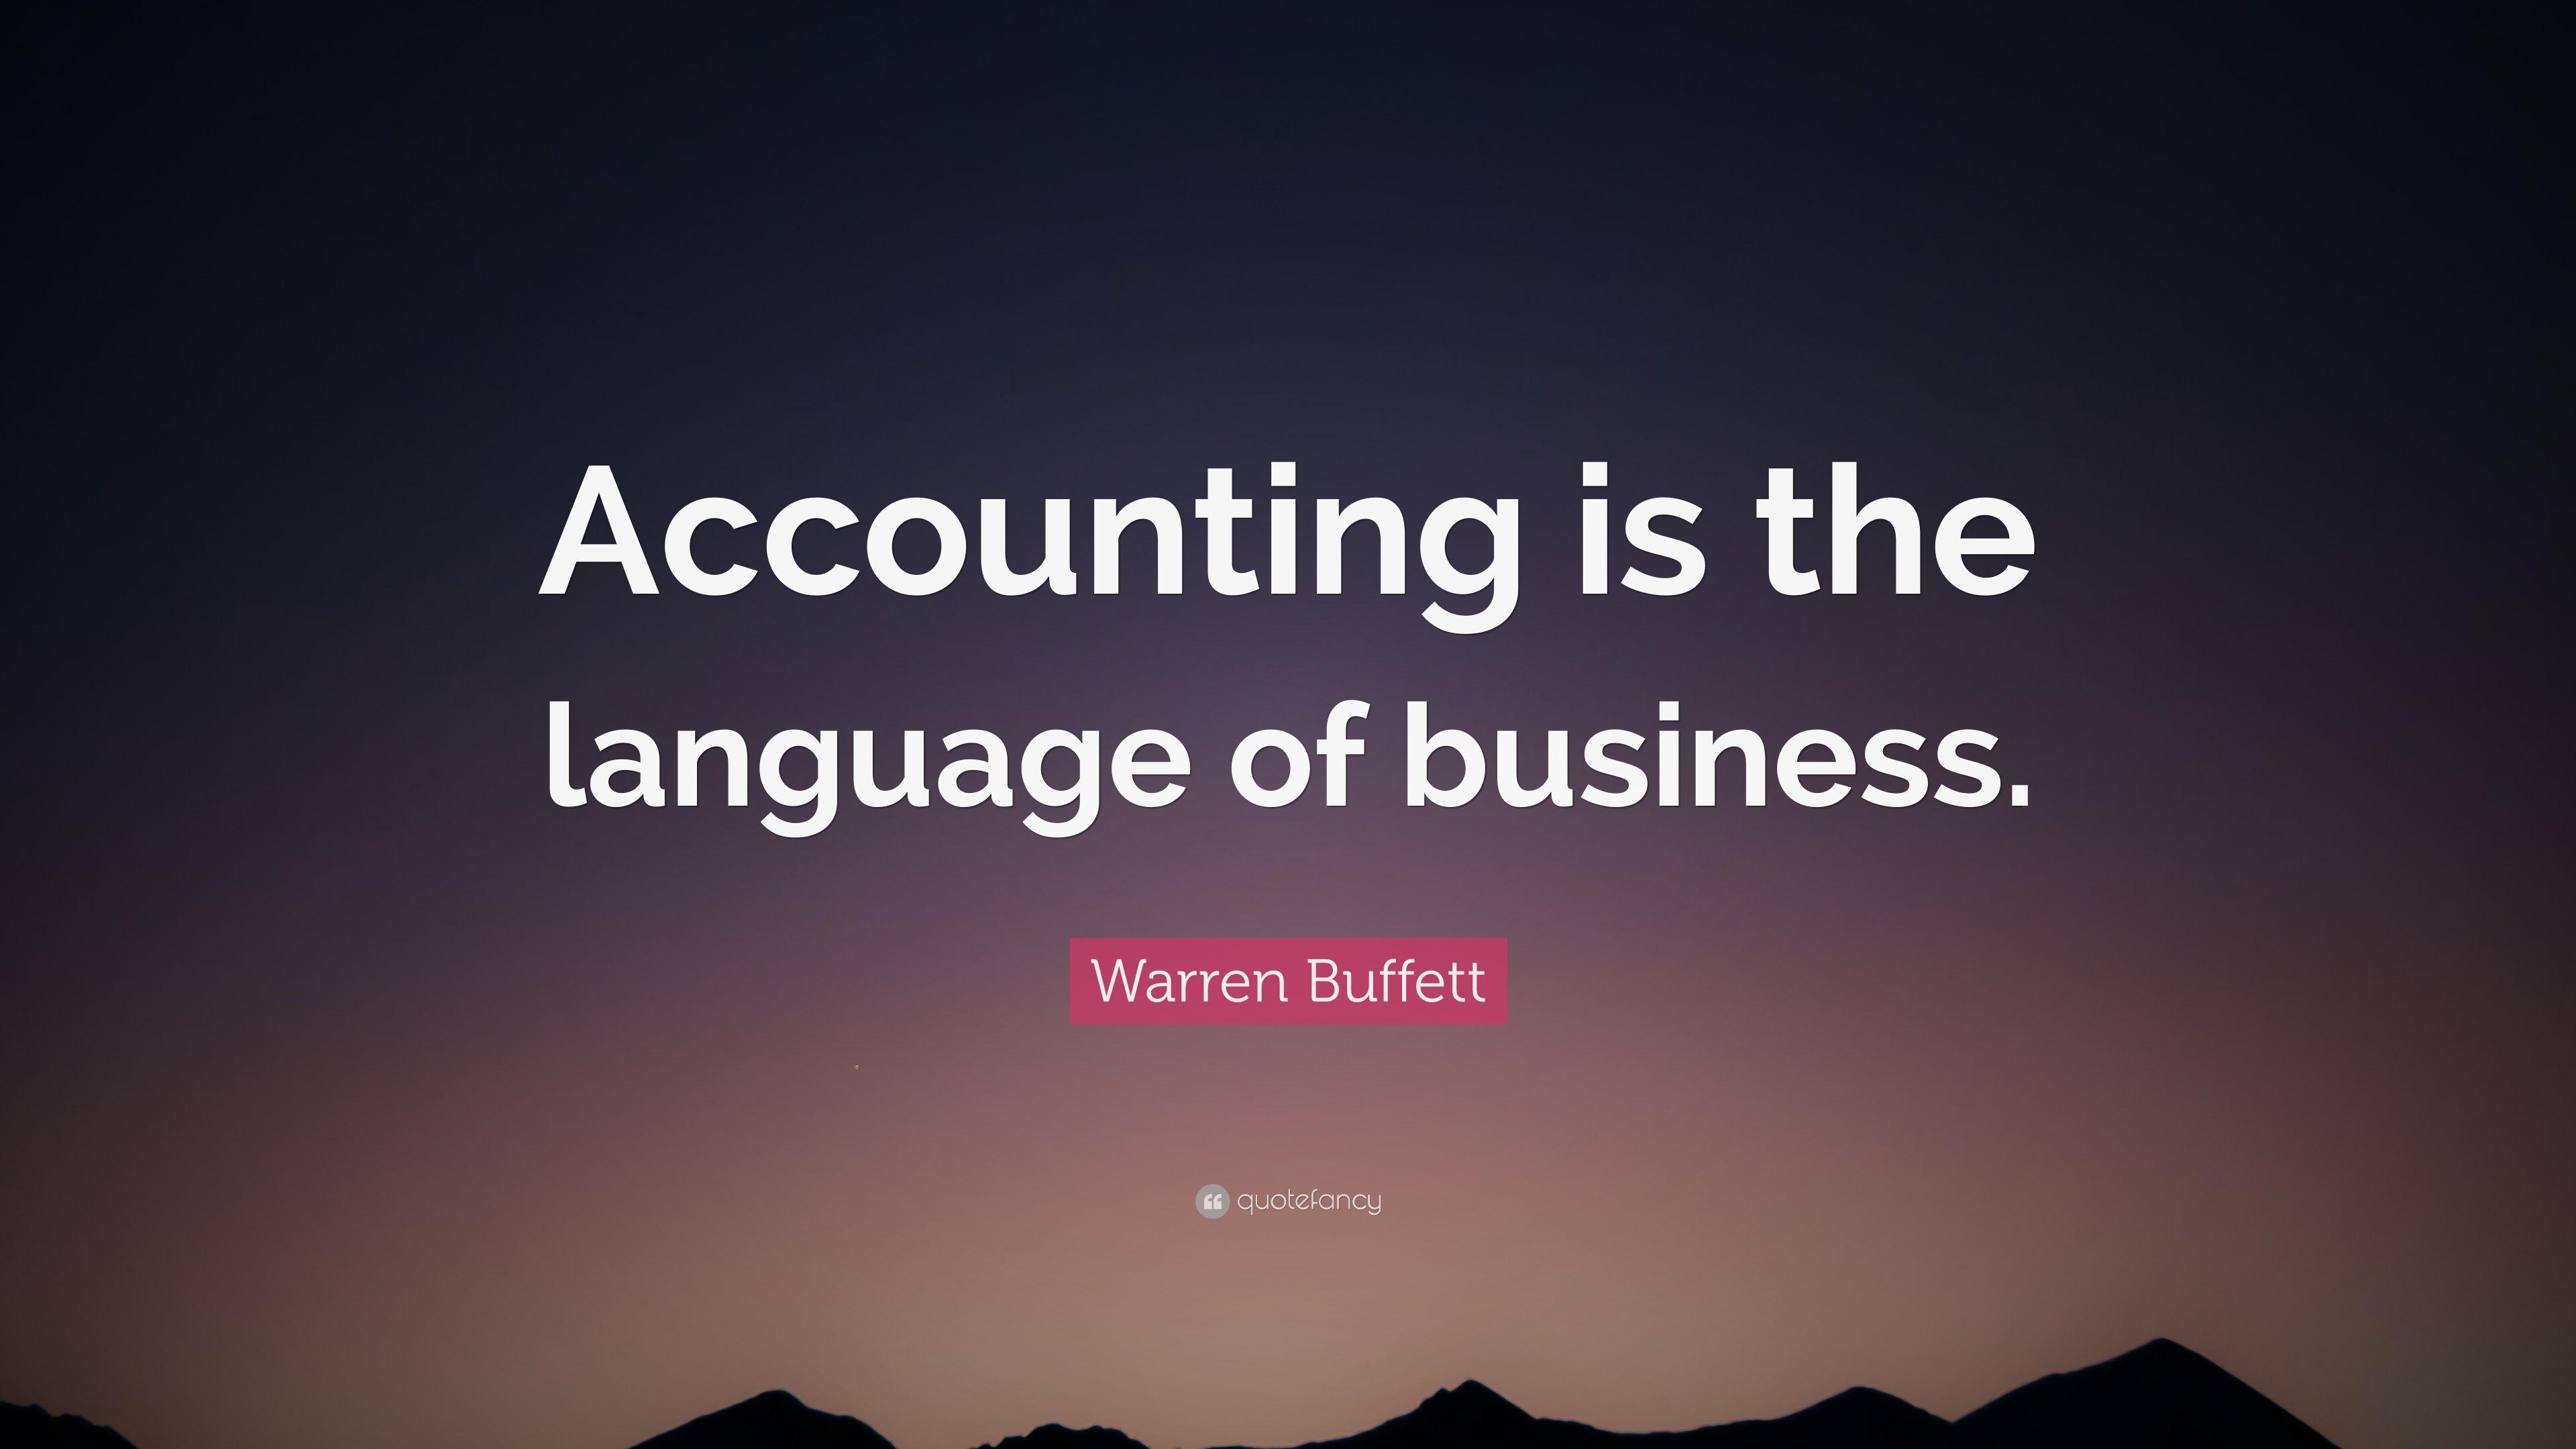 Warren Buffett Quote: “Accounting is the language of business